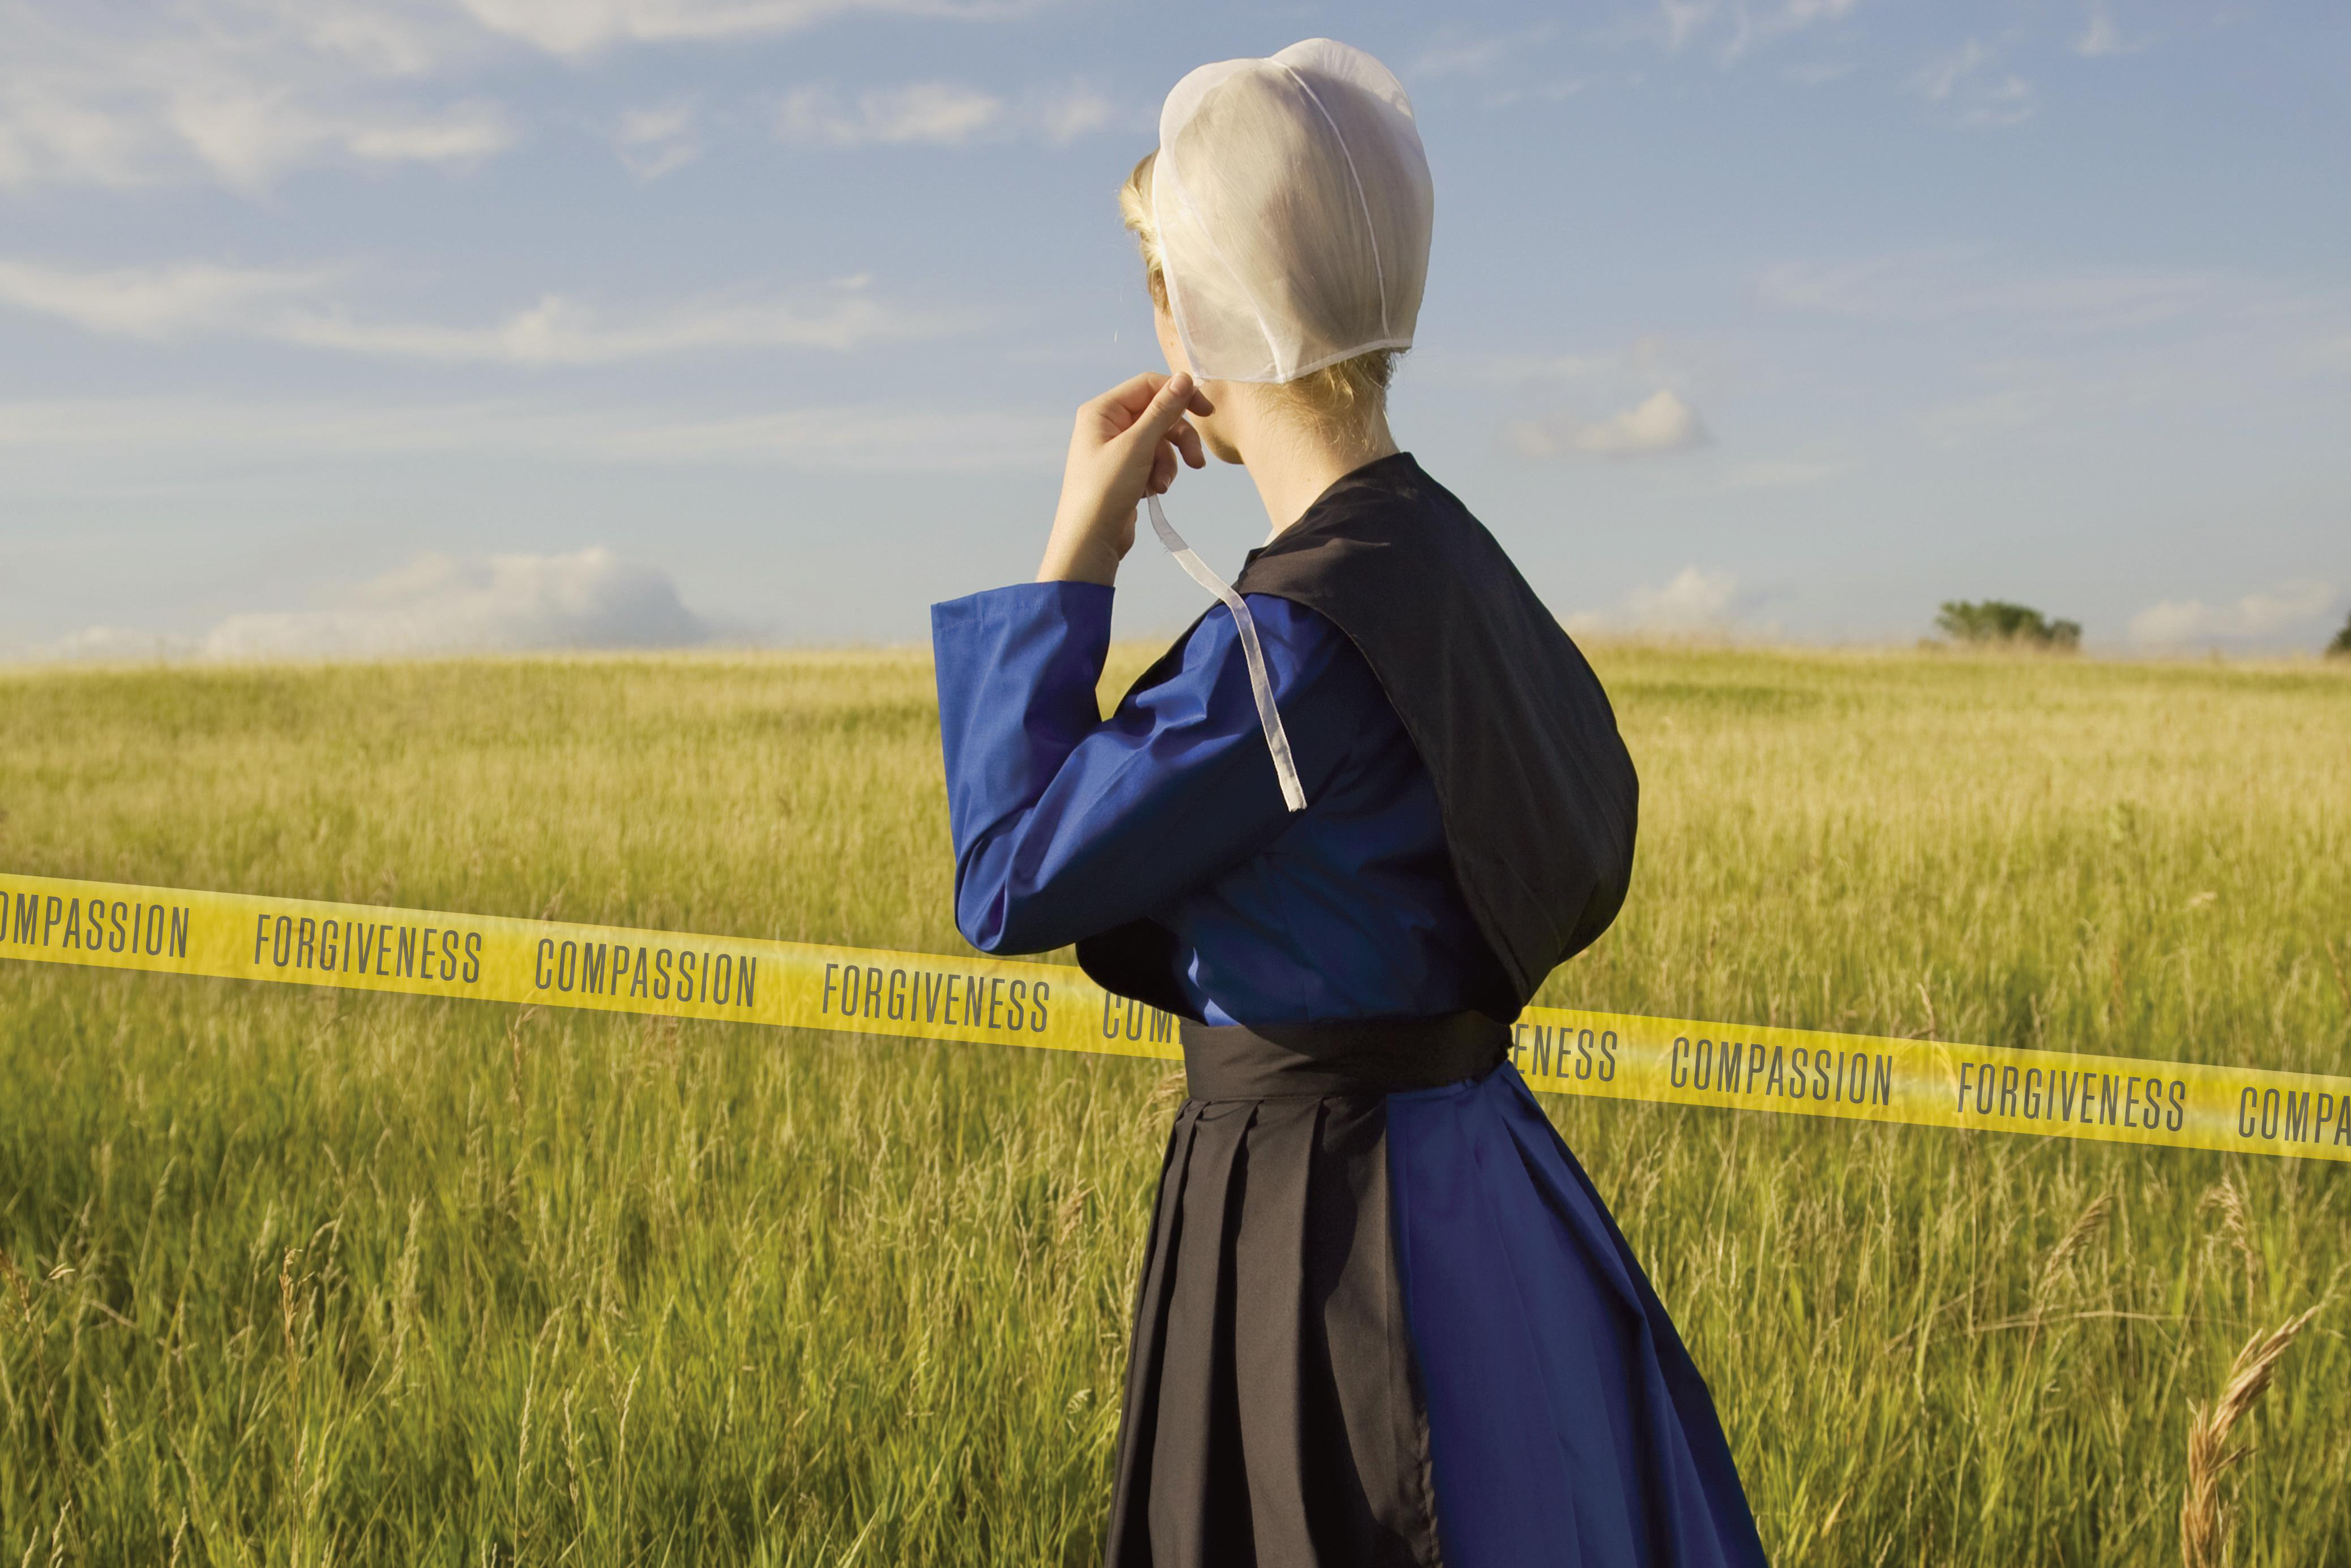 PErson facing the other way in Amish dress